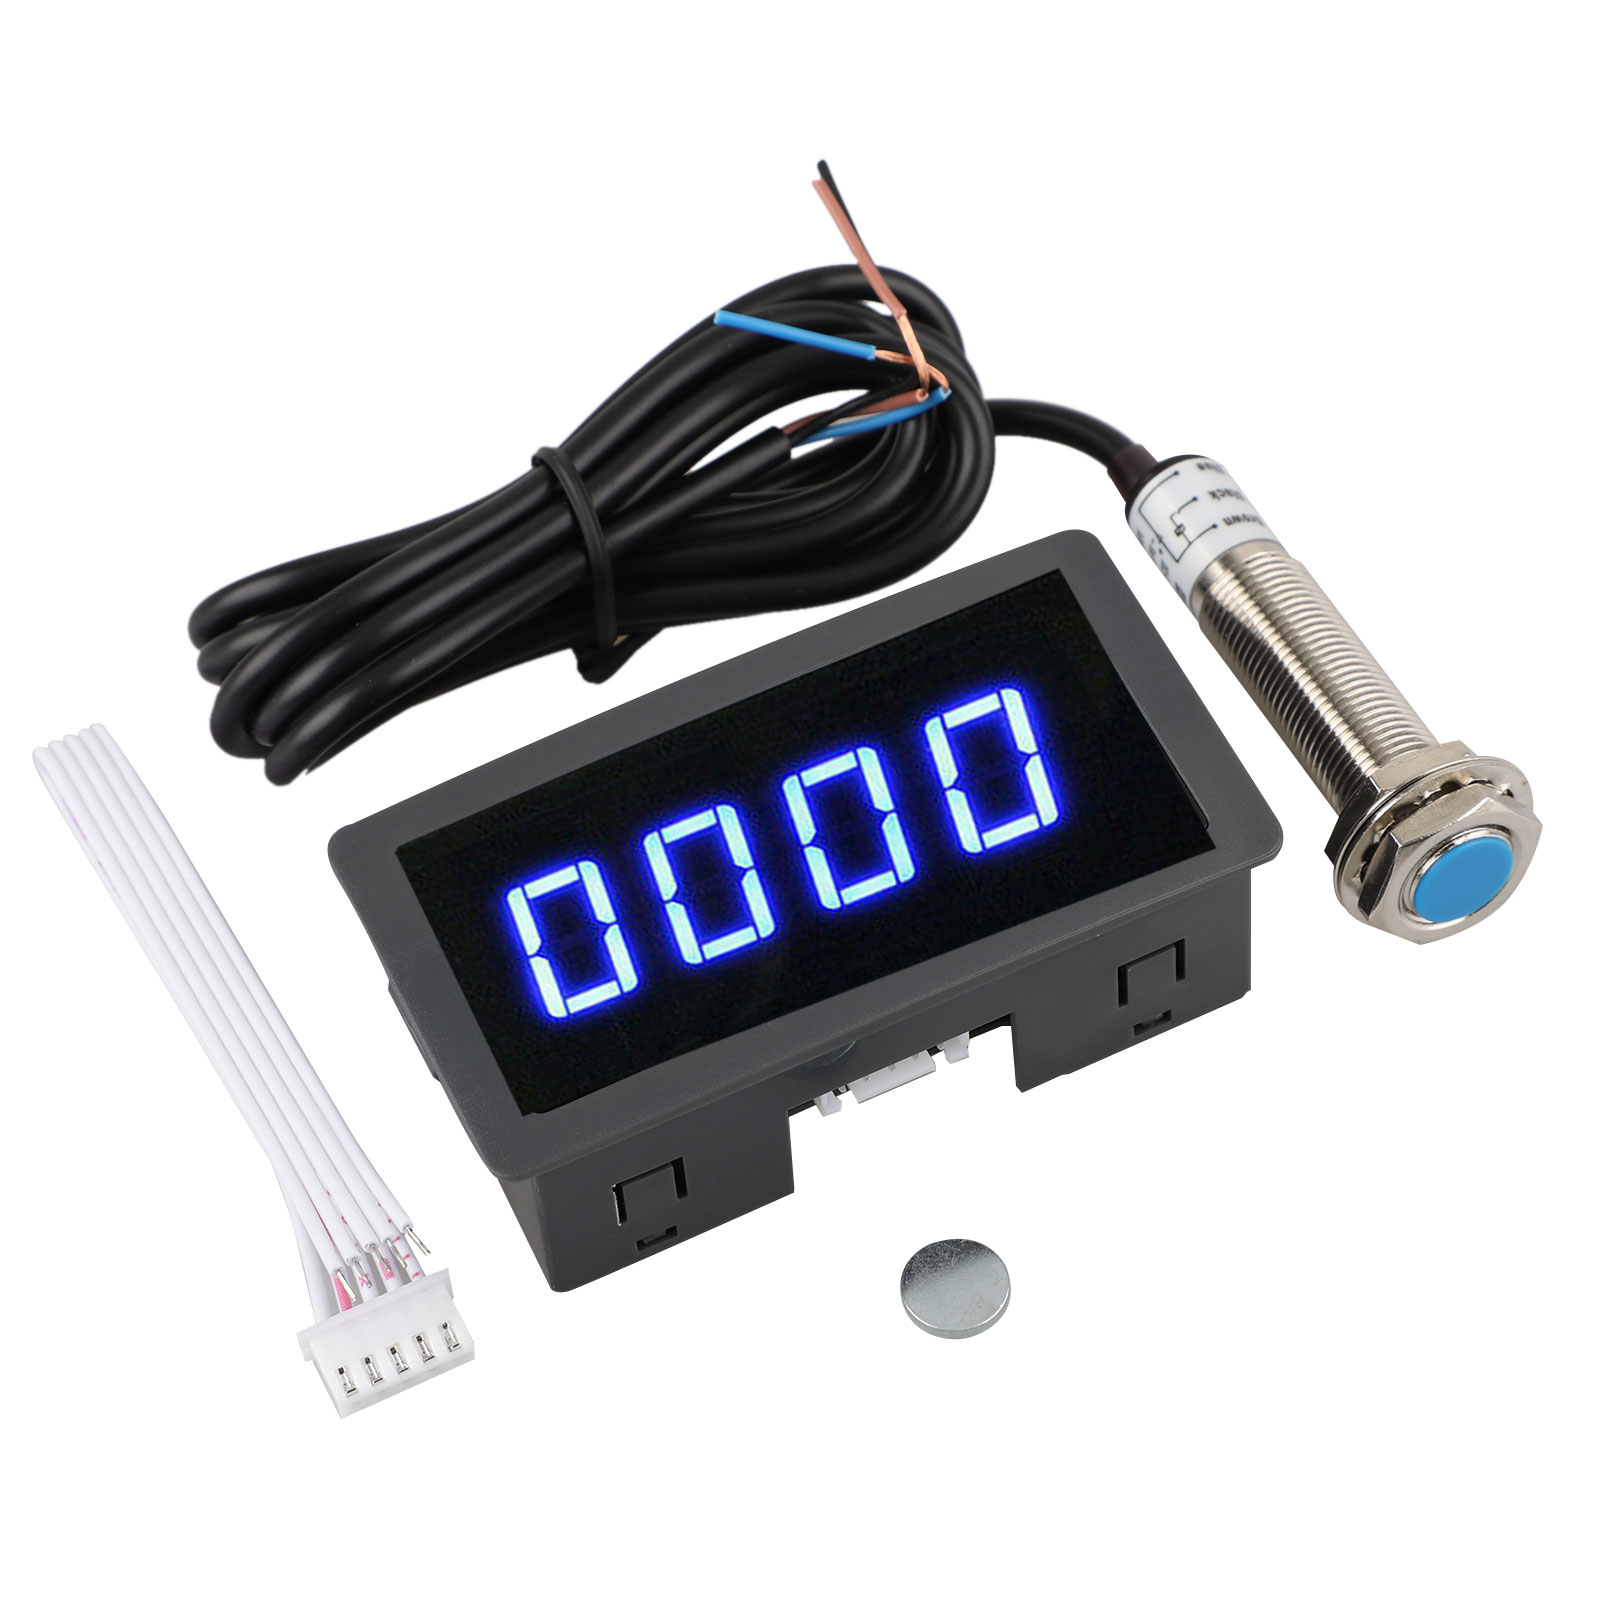 NPN Hall Red 4 Digit Motor LED Tacho High Precision Tachometer Proximity Switch Digital Display Speedometer RPM Gauge for RPM Speed Measurement 